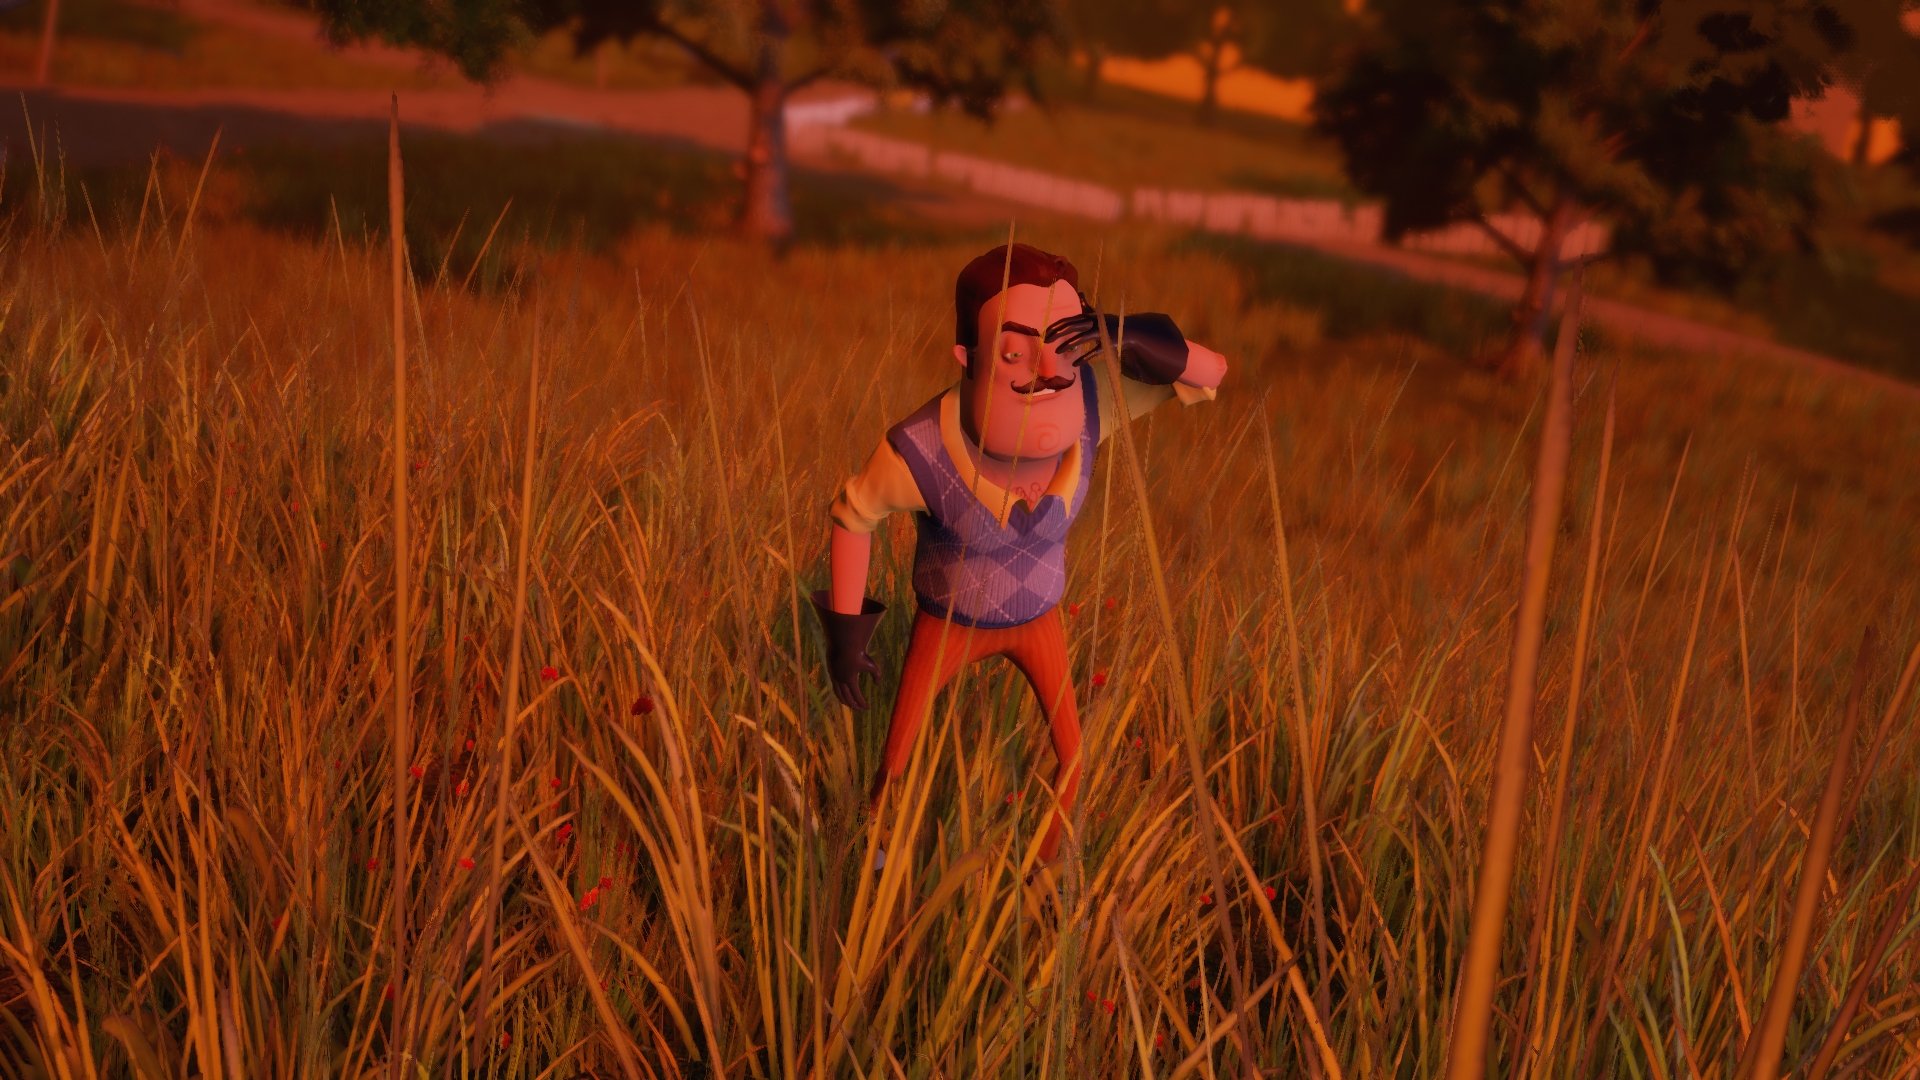 hello neighbor two download free